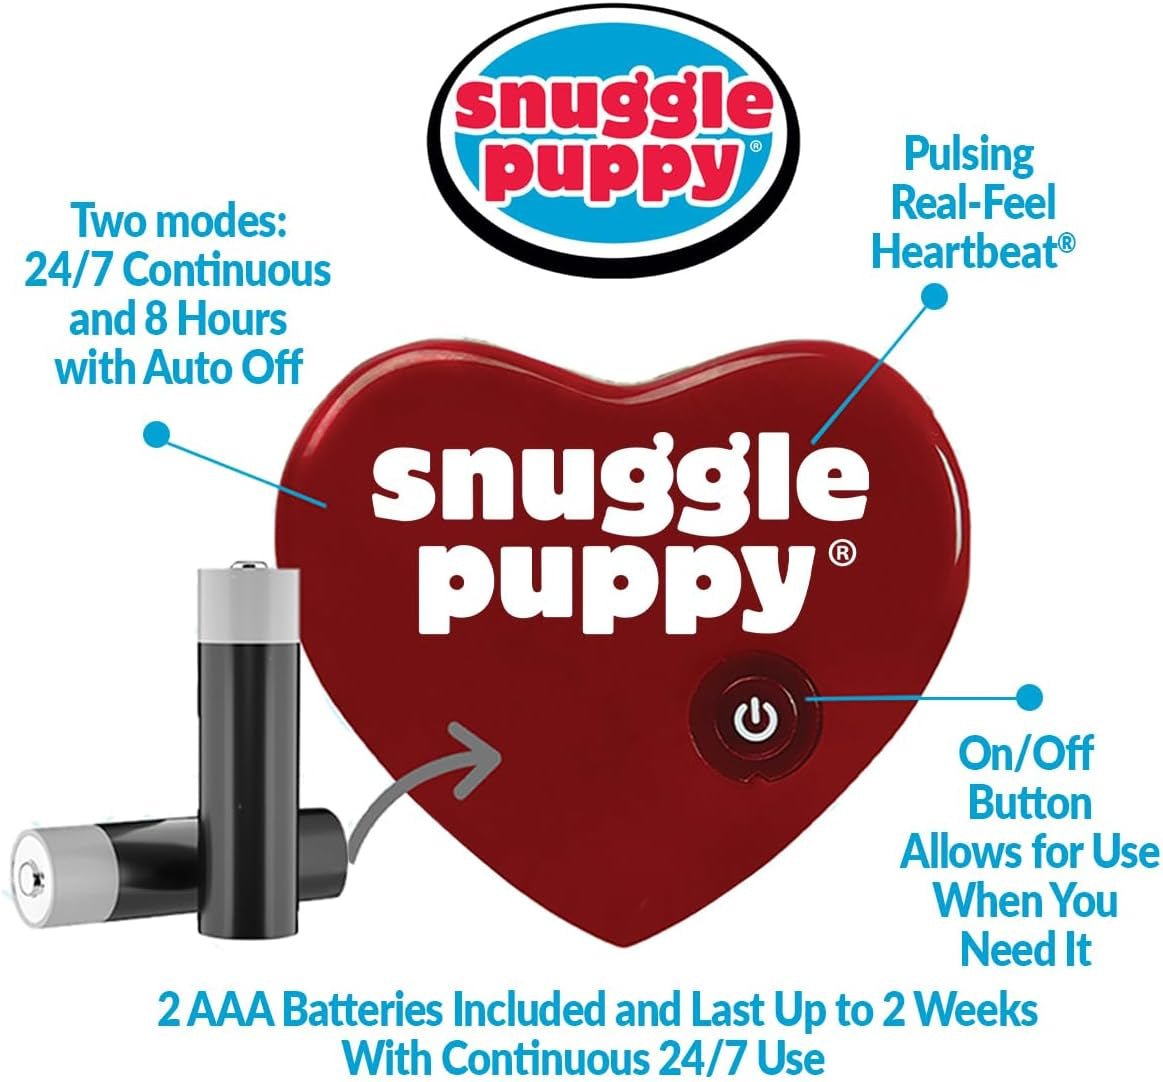 Original Snuggle Puppy Heartbeat Stuffed Toy for Dogs - Pet Anxiety Relief and Calming Aid - Comfort Toy for Behavioral Training - Biscuit